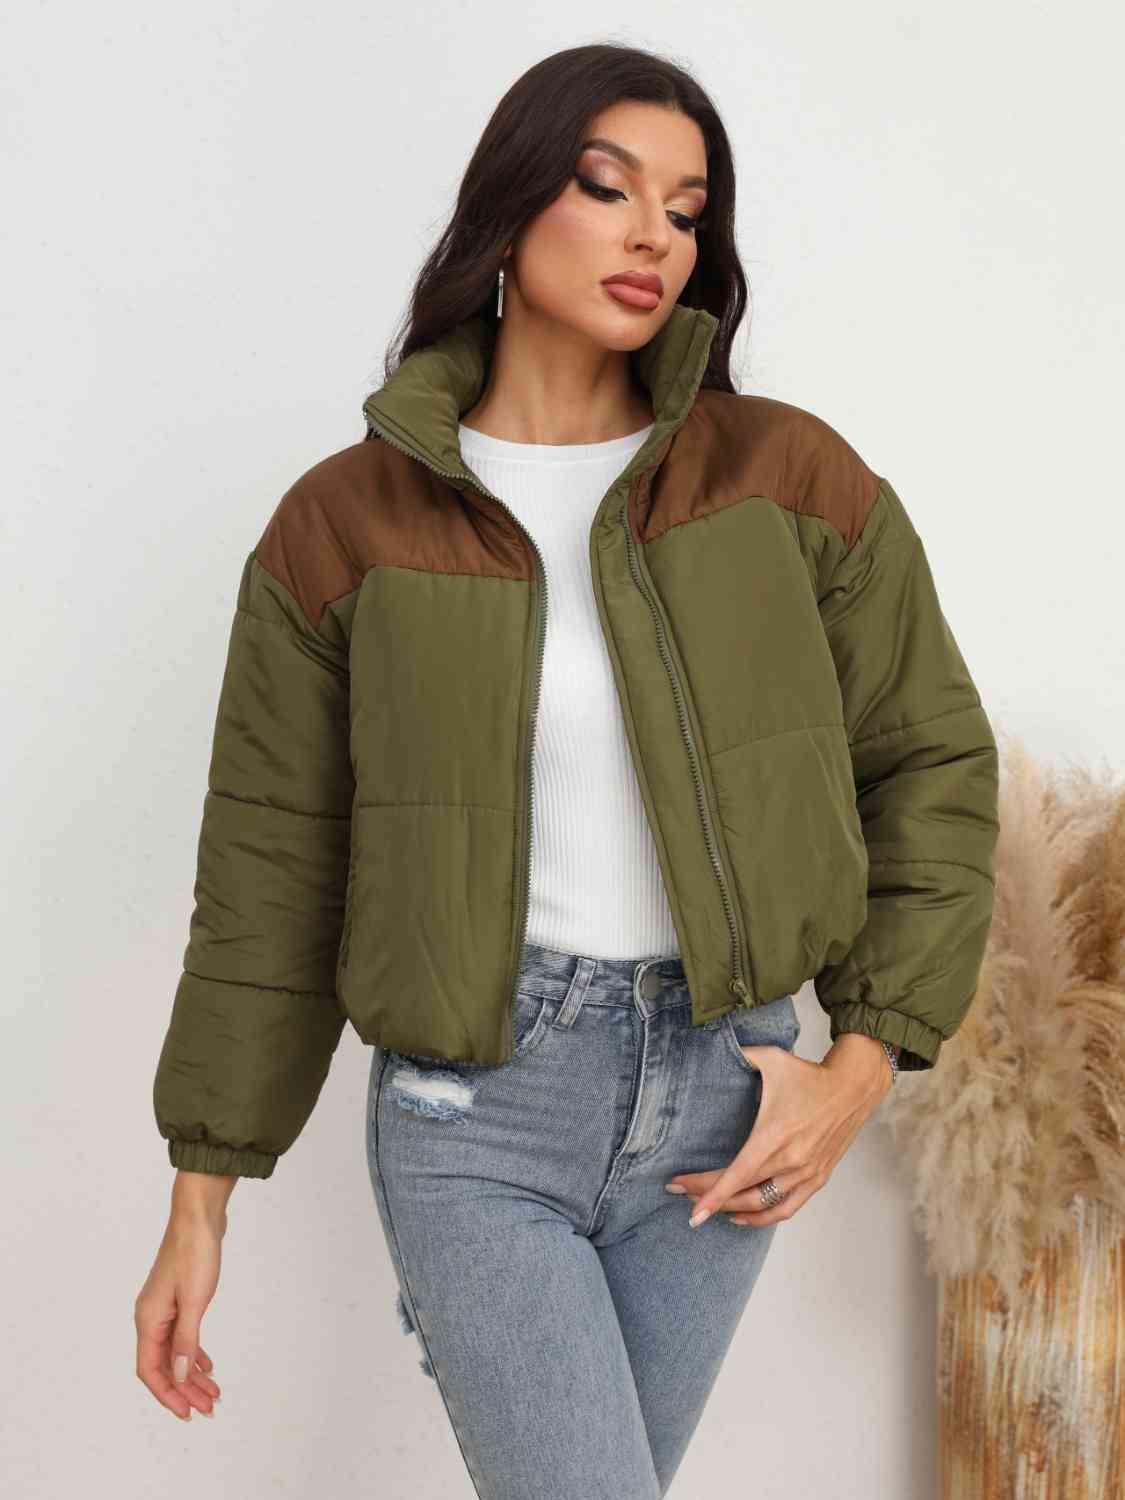 A 'Zip-Up Puffer Jacket,' a cold-weather outerwear piece designed for insulation and warmth, typically featuring a zipper closure for easy wear and a quilted puffer design for added insulation and style.